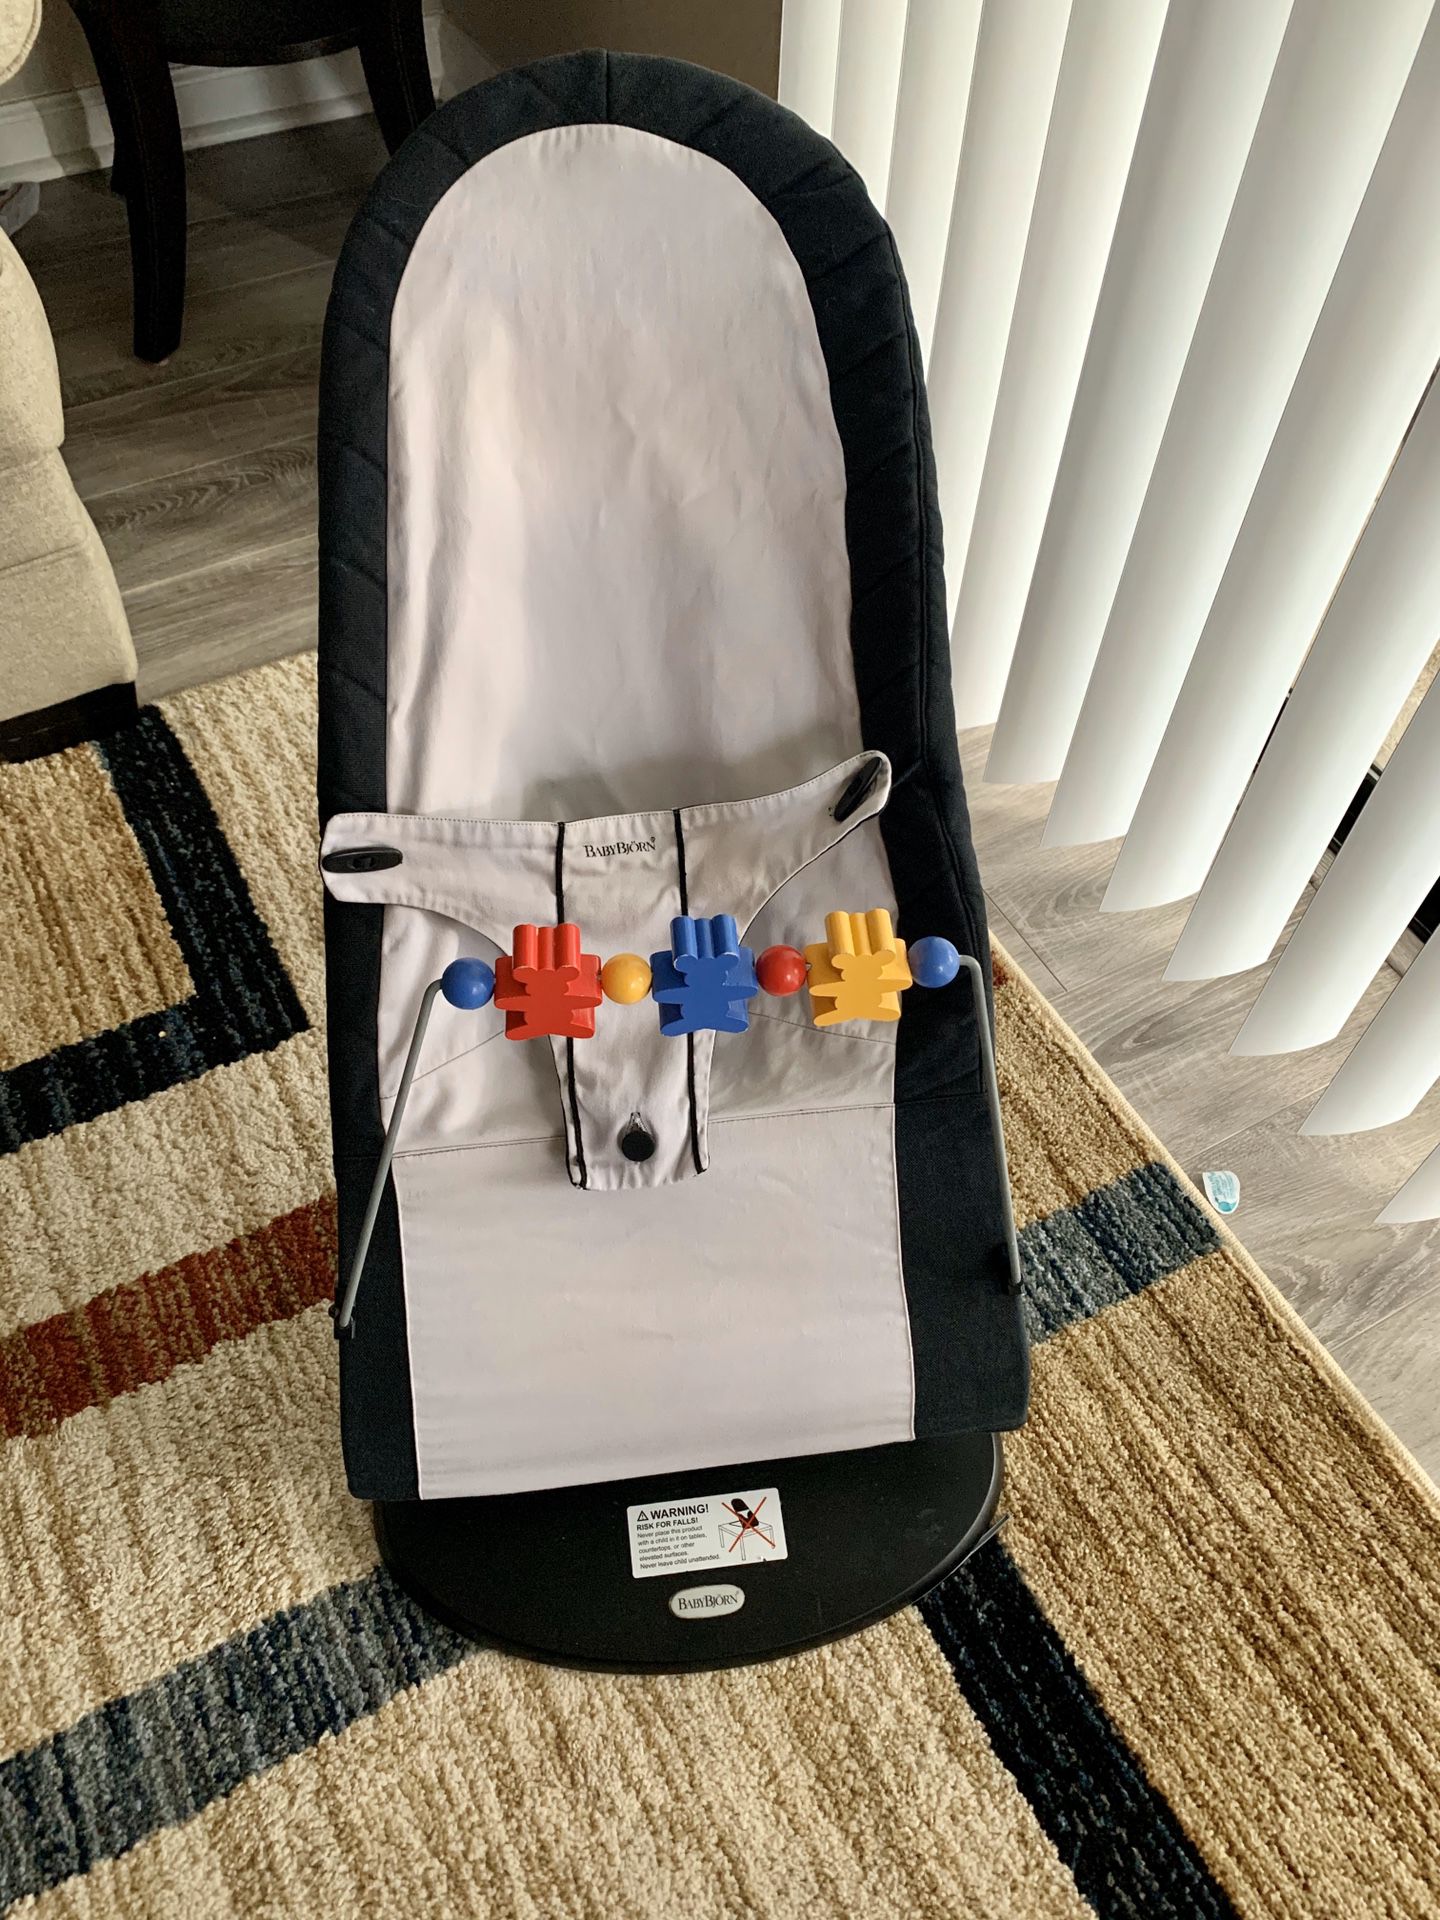 Baby Bjorn bouncer with toy bar